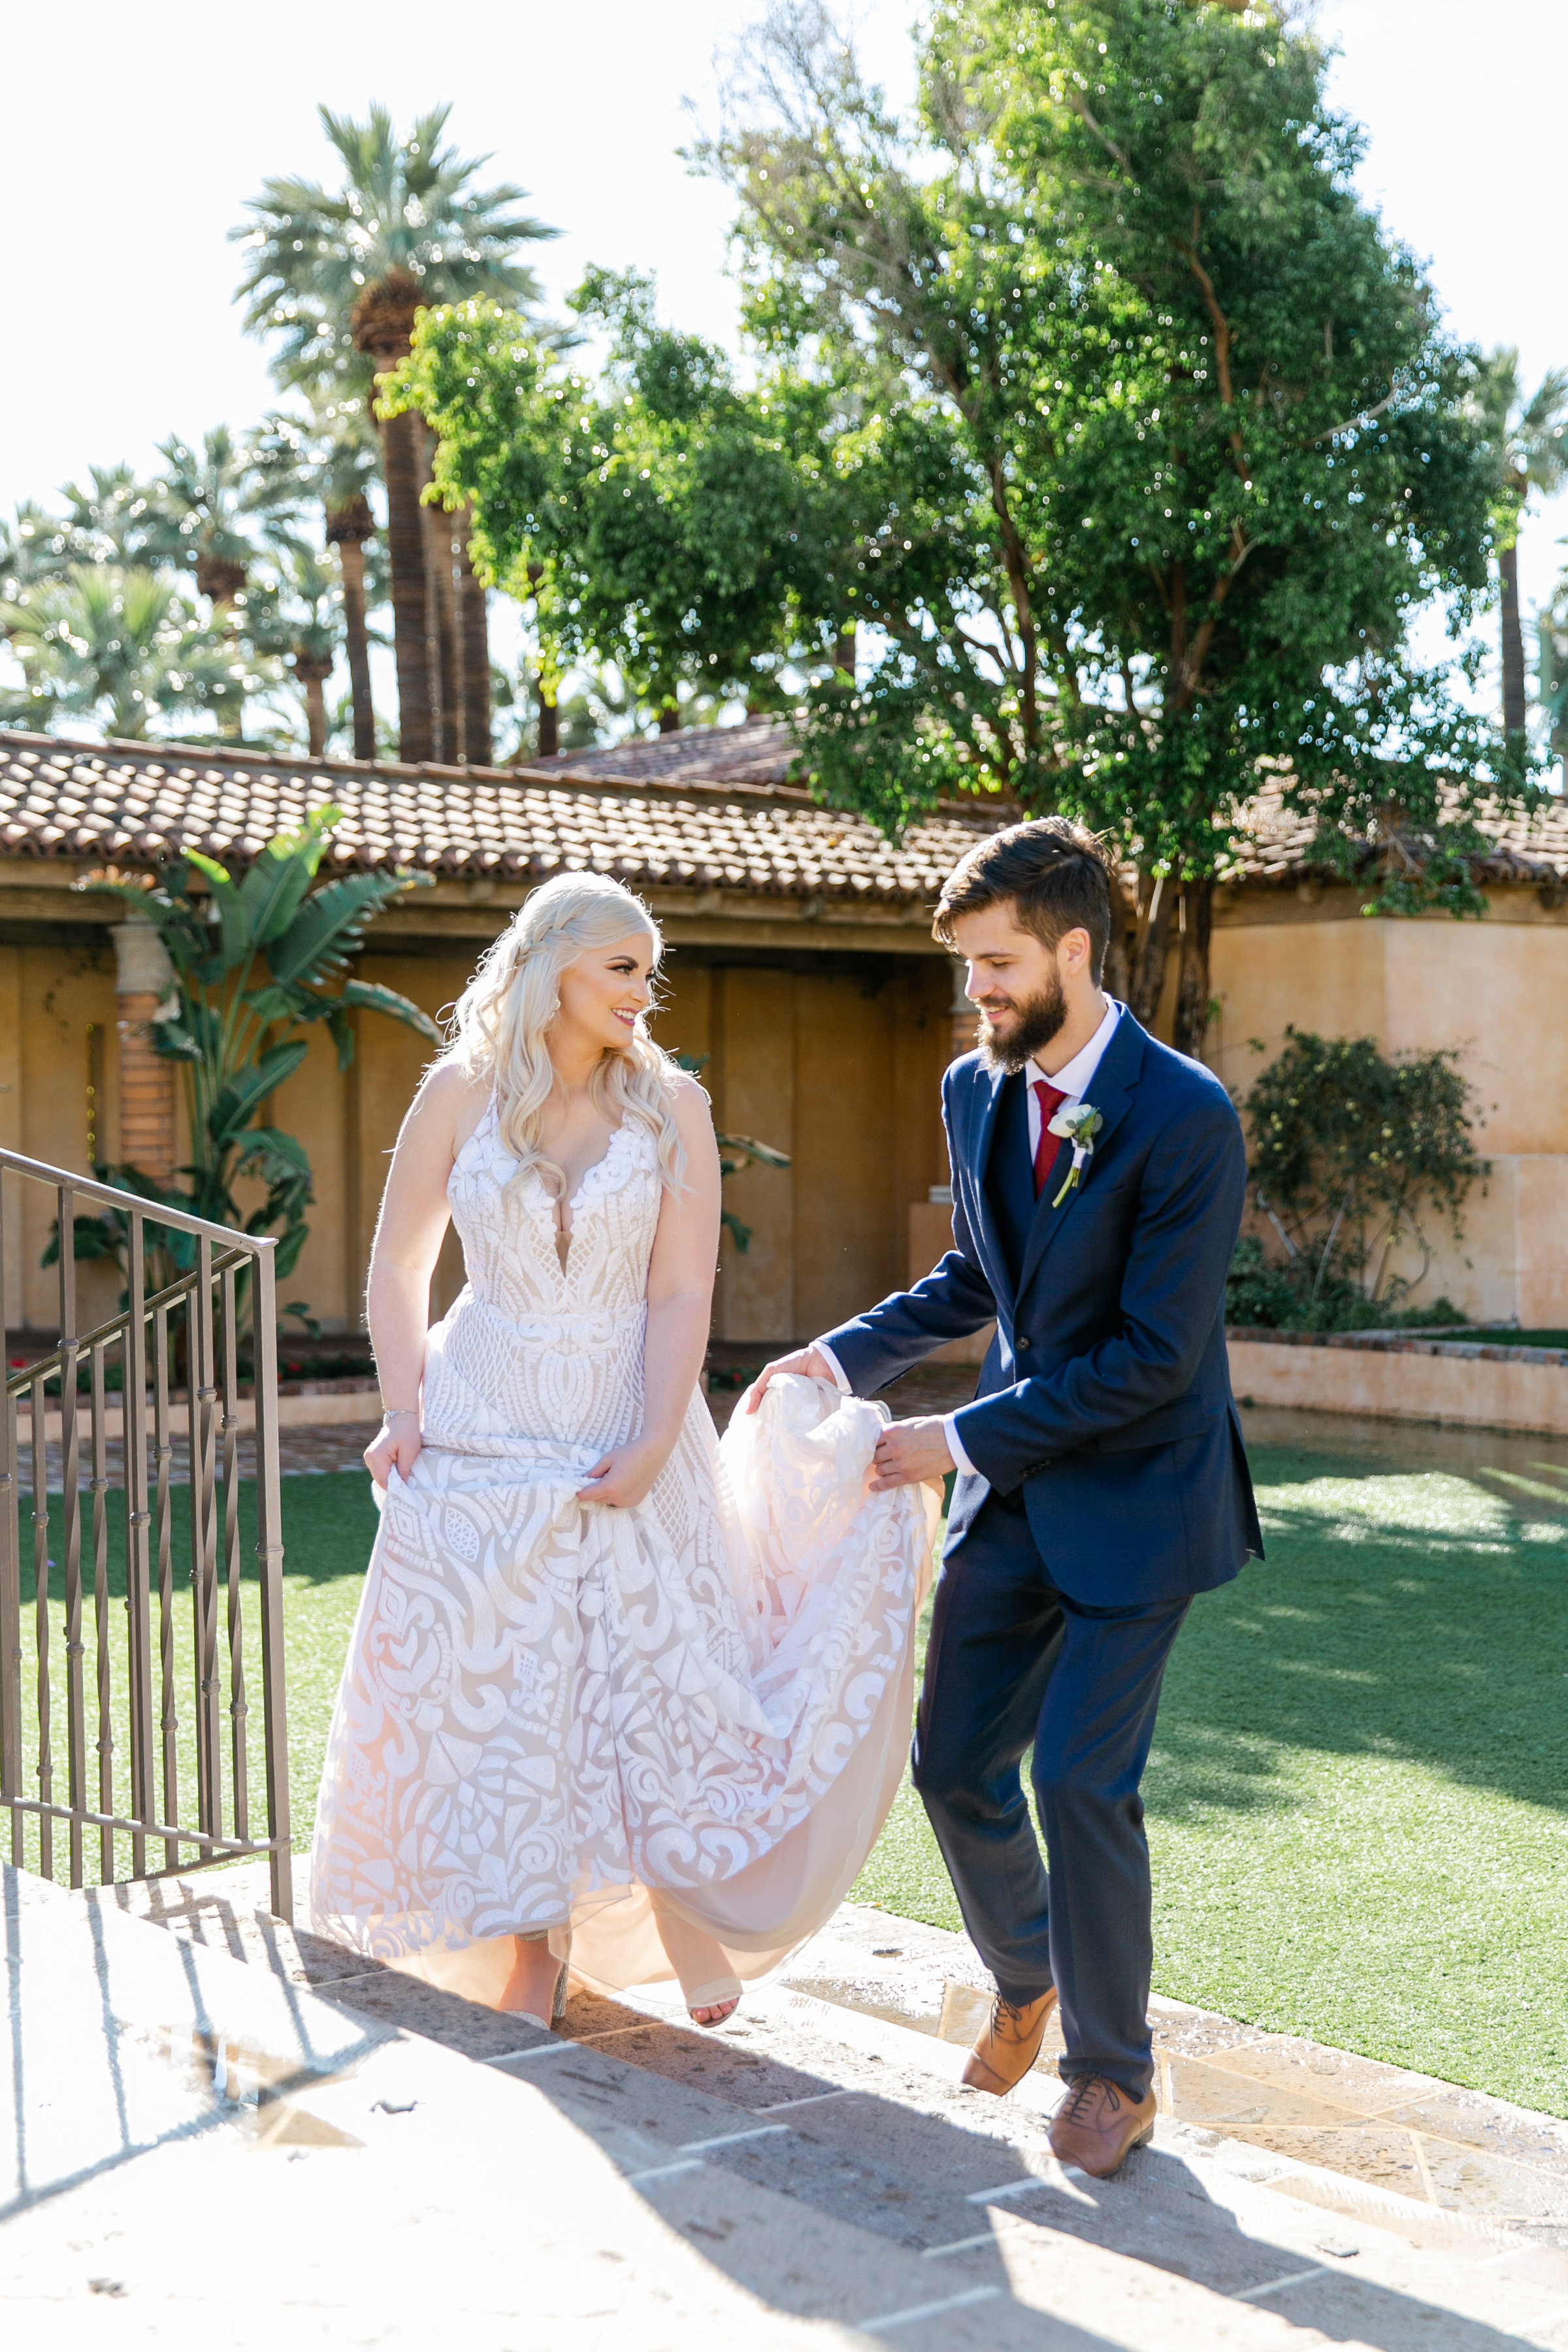 Karlie Colleen Photography - The Royal Palms Wedding - Some Like It Classic - Alex & Sam-176